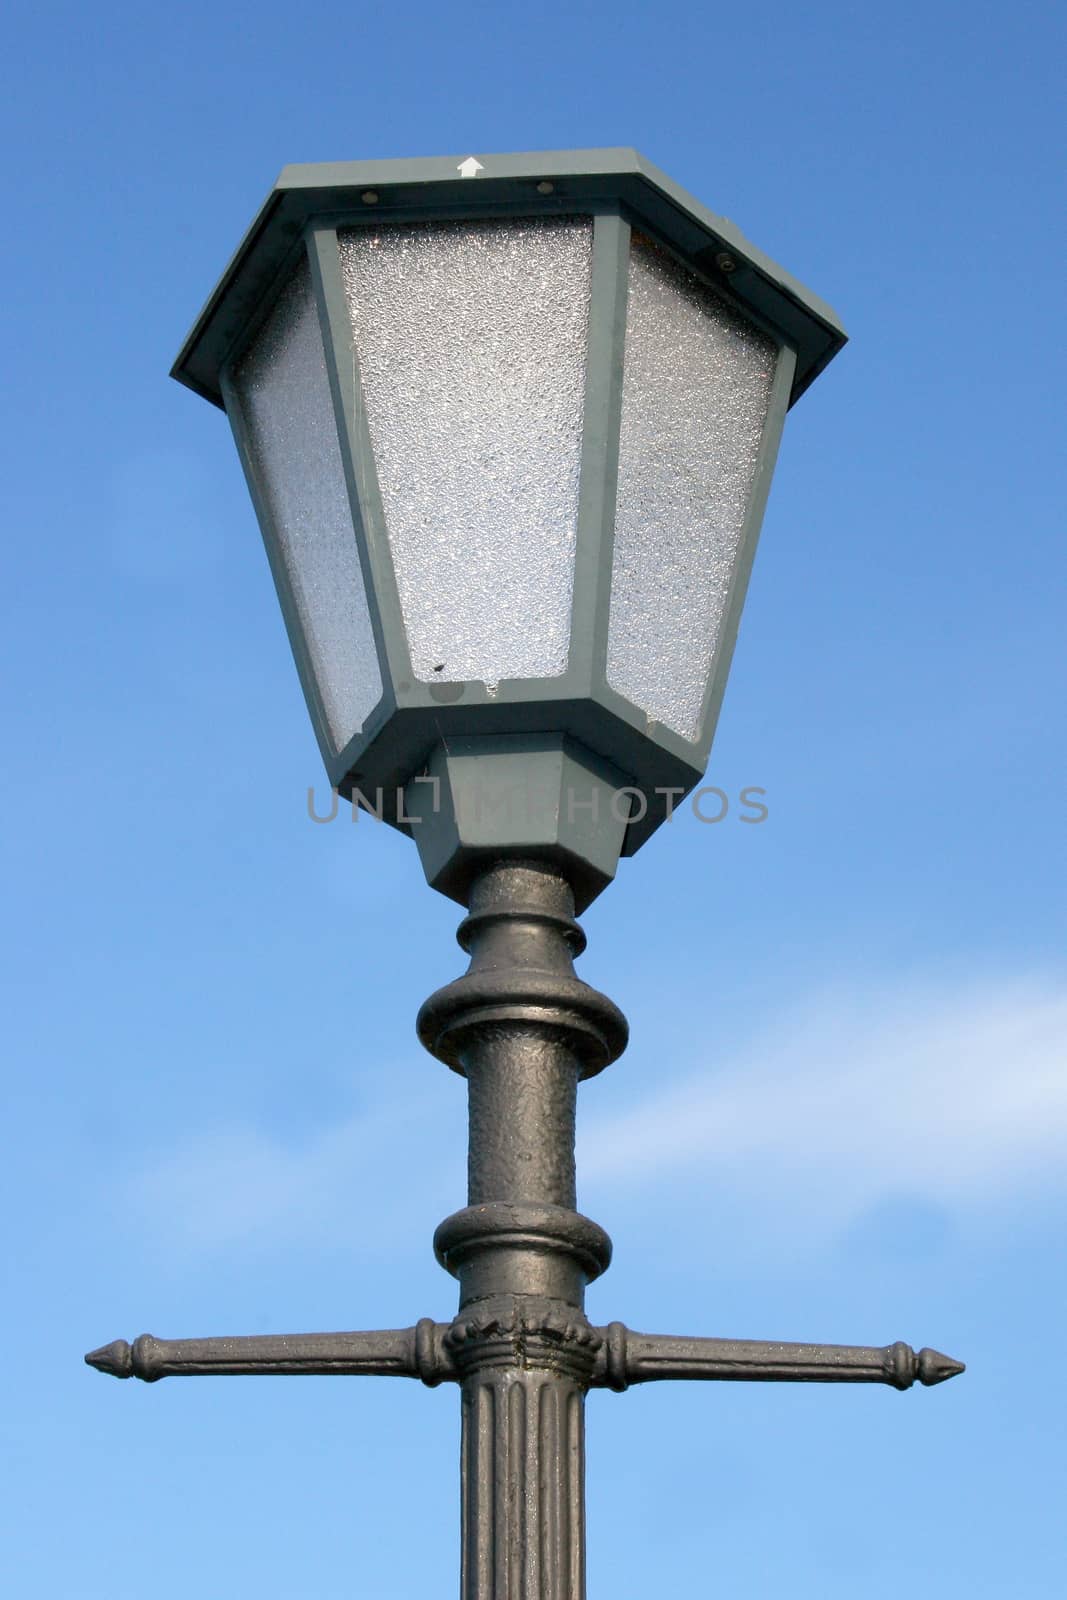 A decorated street lamp, blue sky in the background